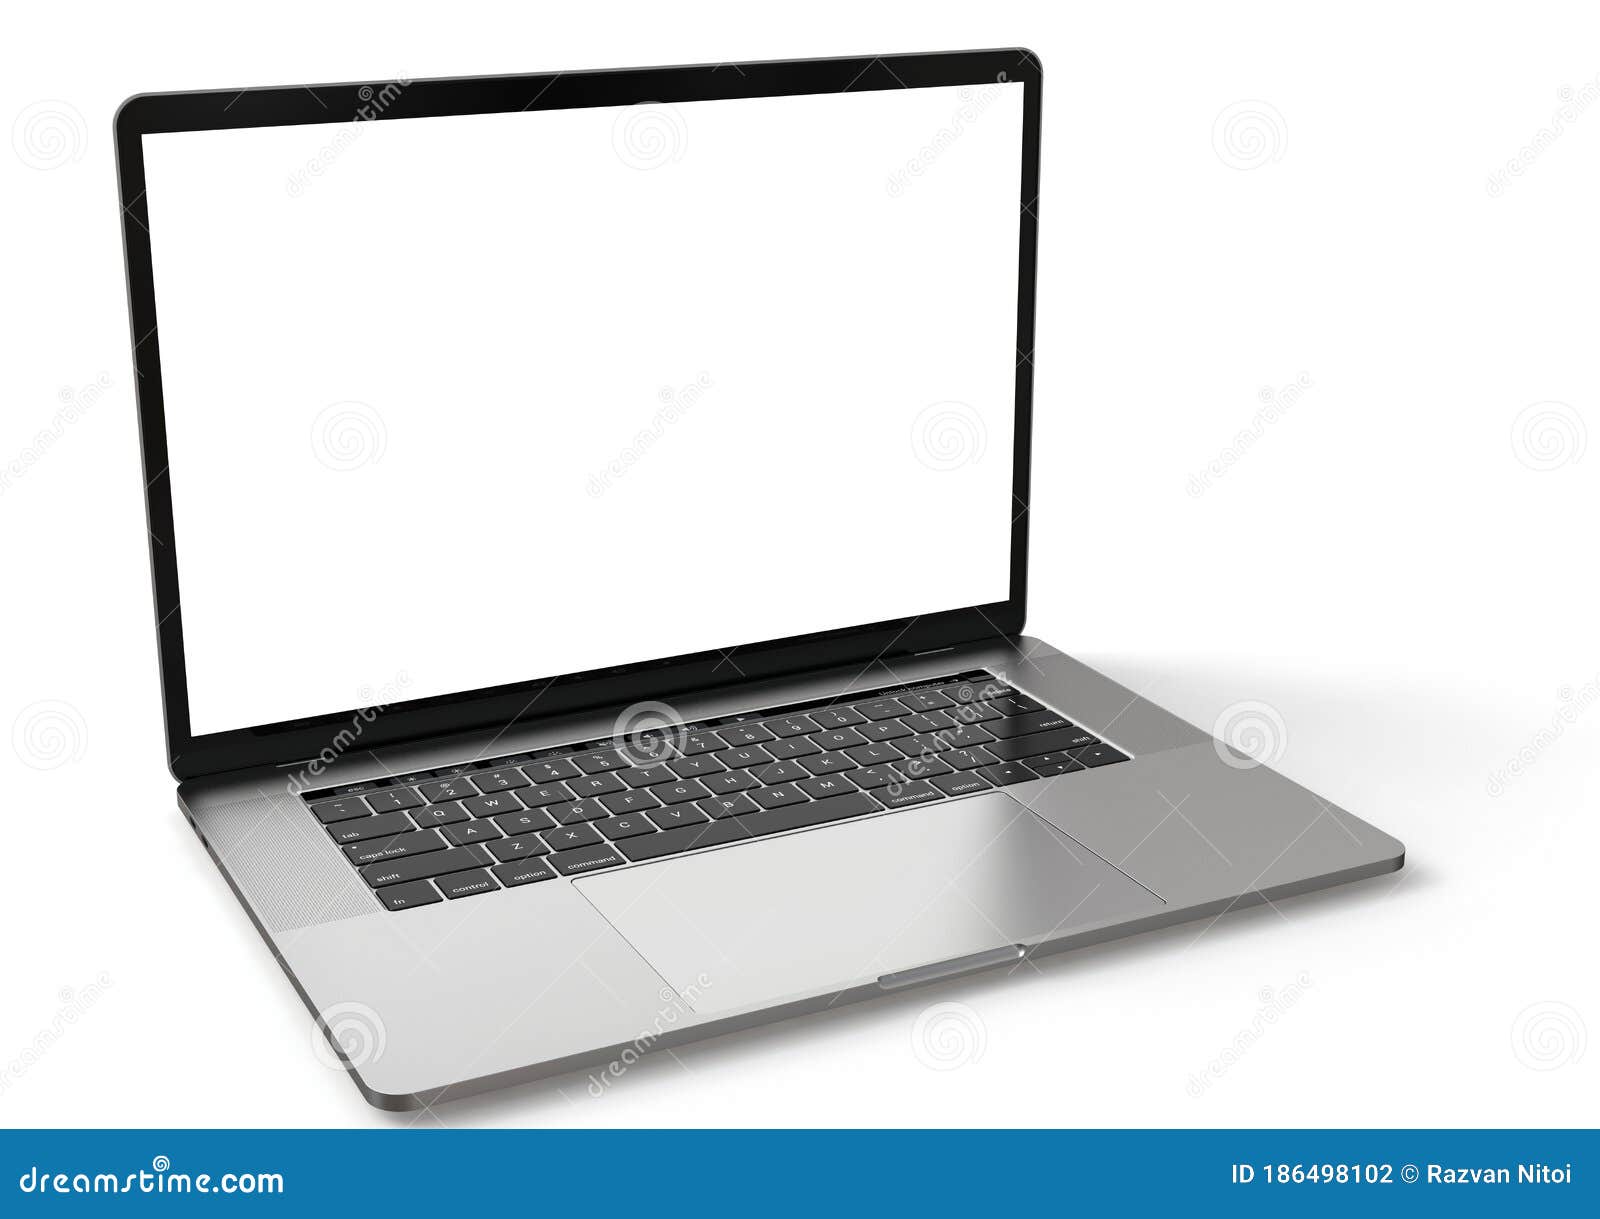 laptop computer macbook pro style, with blank screen on white background, for mockup